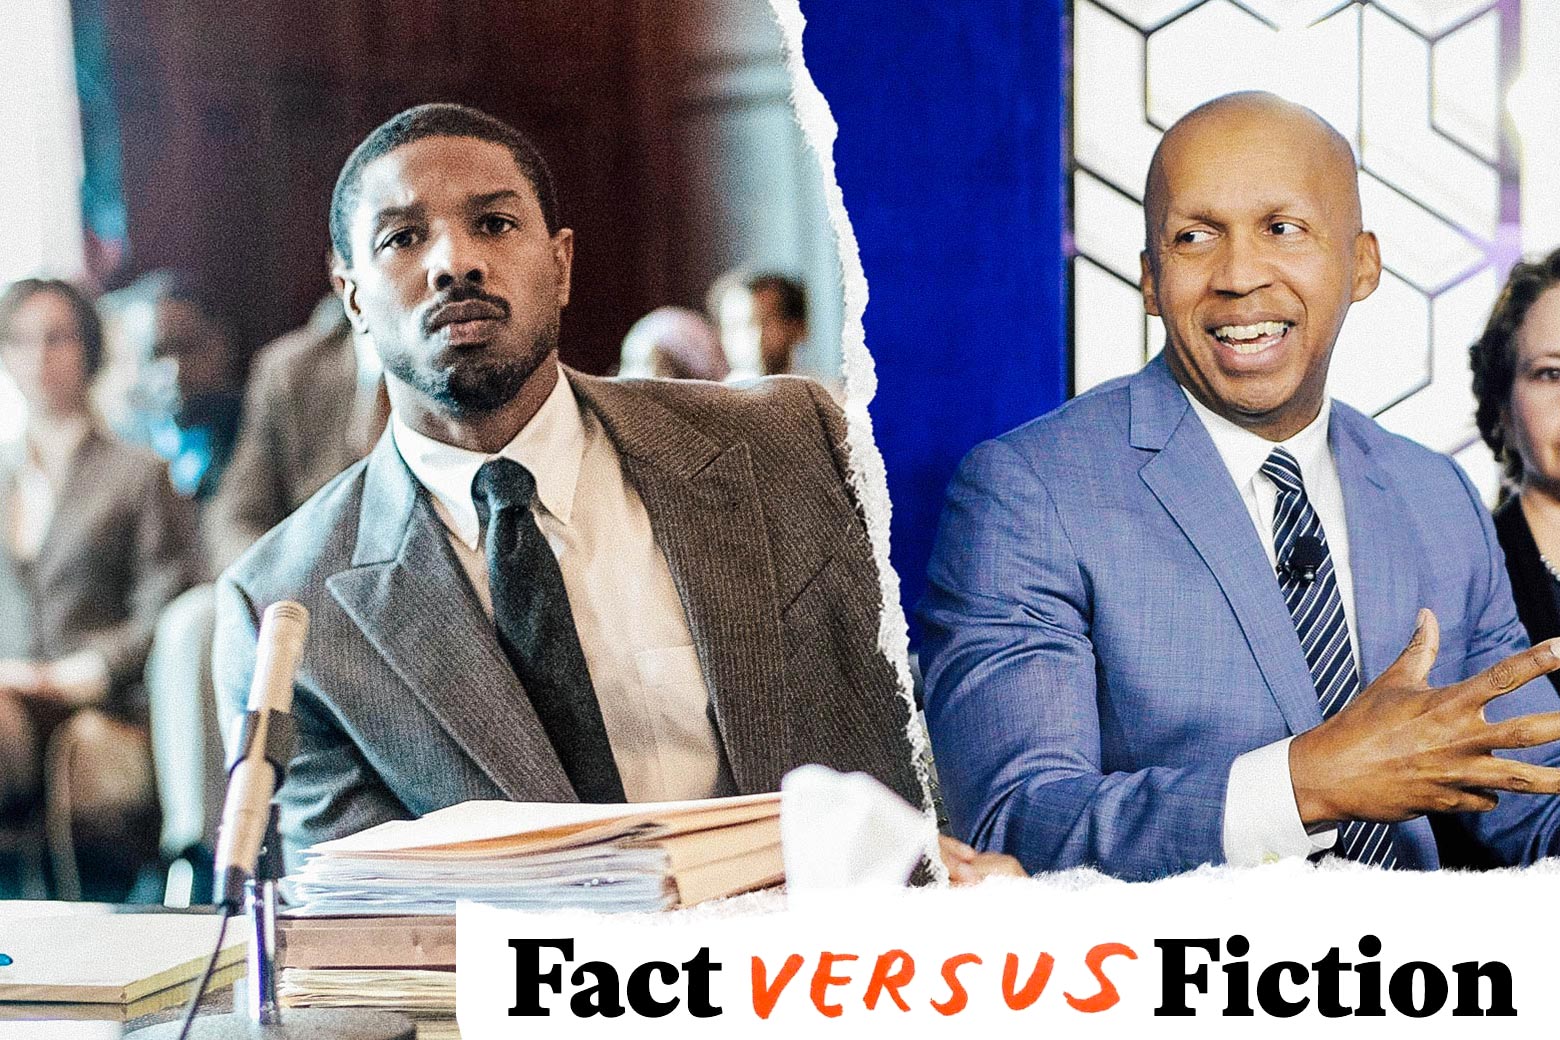 Michael B. Jordan, looking dapper in a silver suit. Bryan Stevenson, also looking dapper and handsome, albeit in a blue suit, and not *quite* as handsome. In the bottom right, the Fact vs. Fiction series logo.